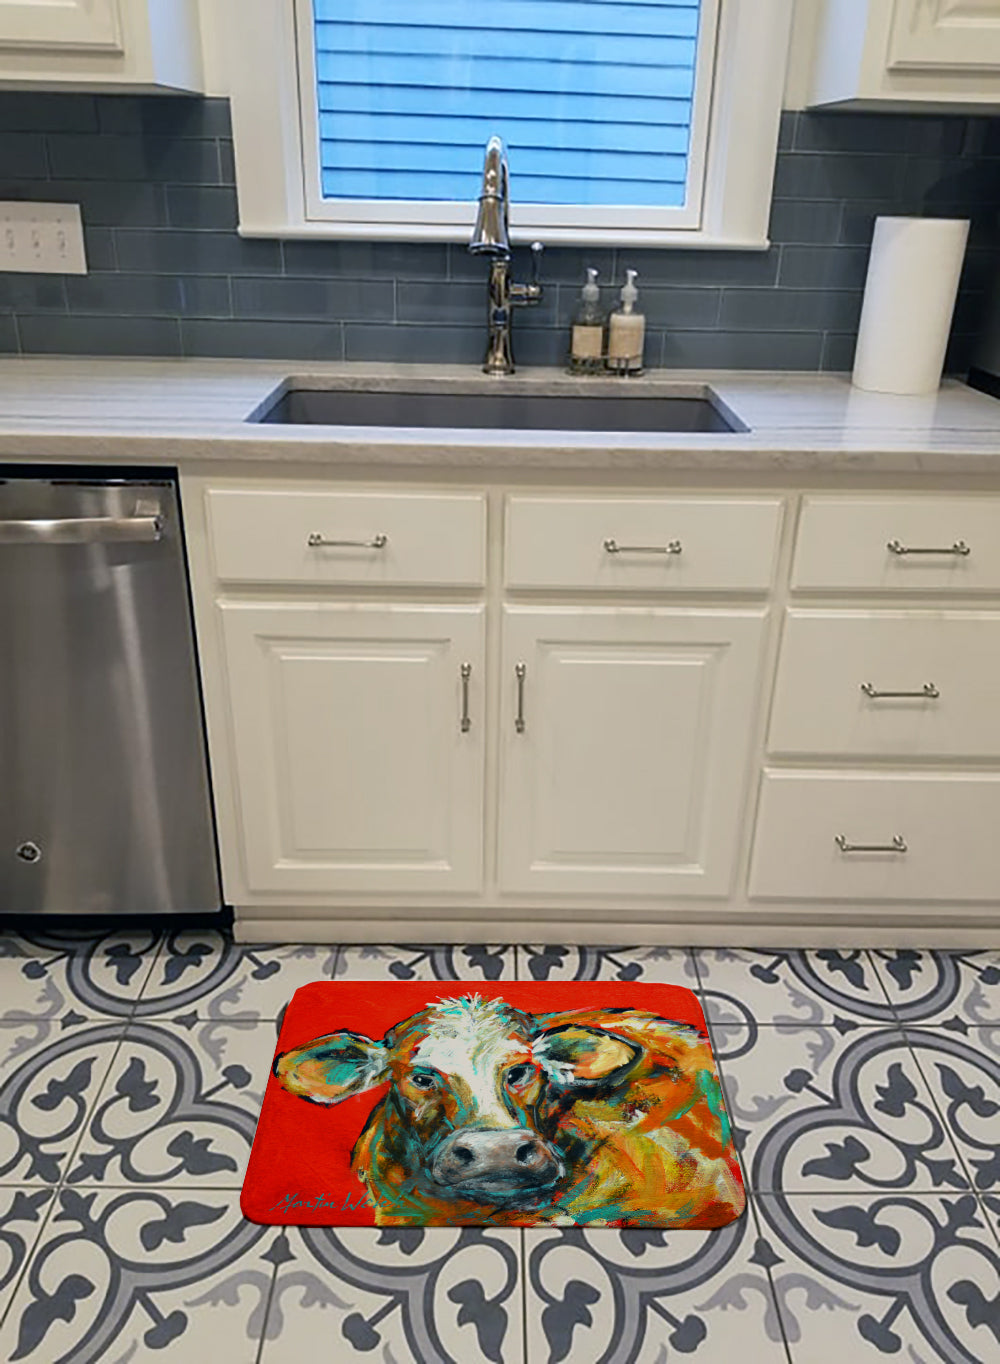 Caught Red Handed Cow Machine Washable Memory Foam Mat MW1272RUG - the-store.com